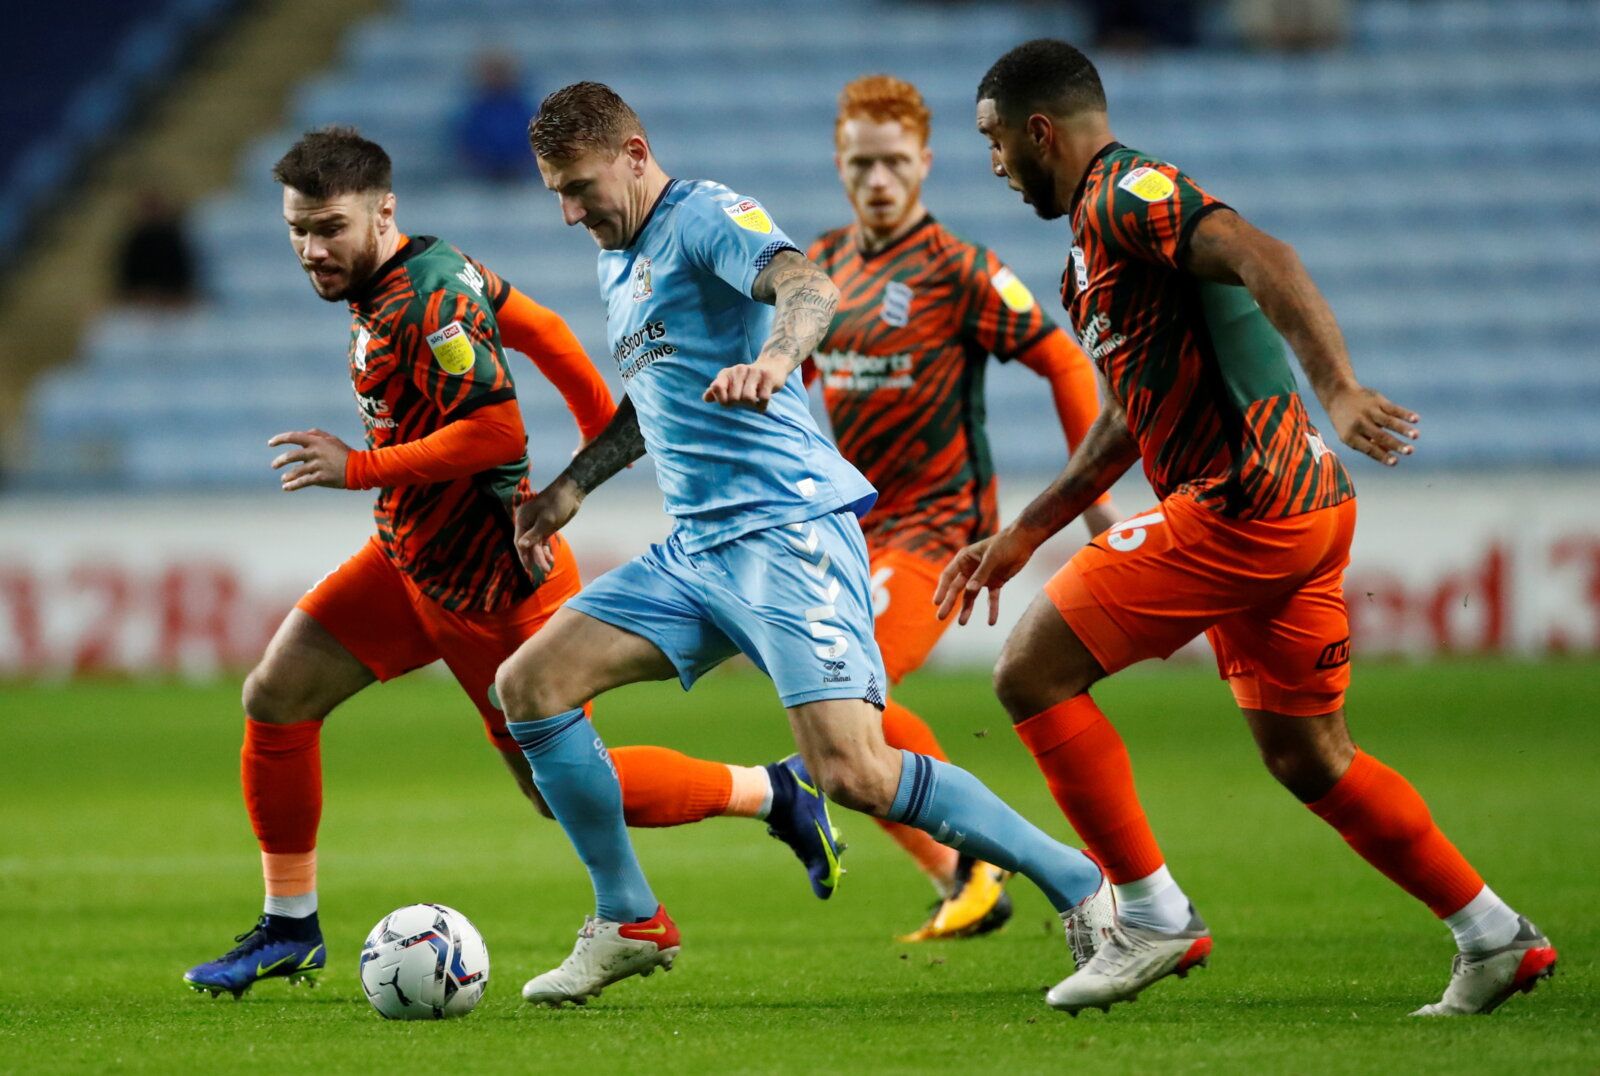 Soccer Football - Championship - Coventry City v Birmingham City - Building Society Arena, Coventry, Britain - November 23, 2021 Coventry City's Kyle McFadzean in action with Birmingham City's Scott Hogan and Troy Deeney Action Images/Andrew Boyers